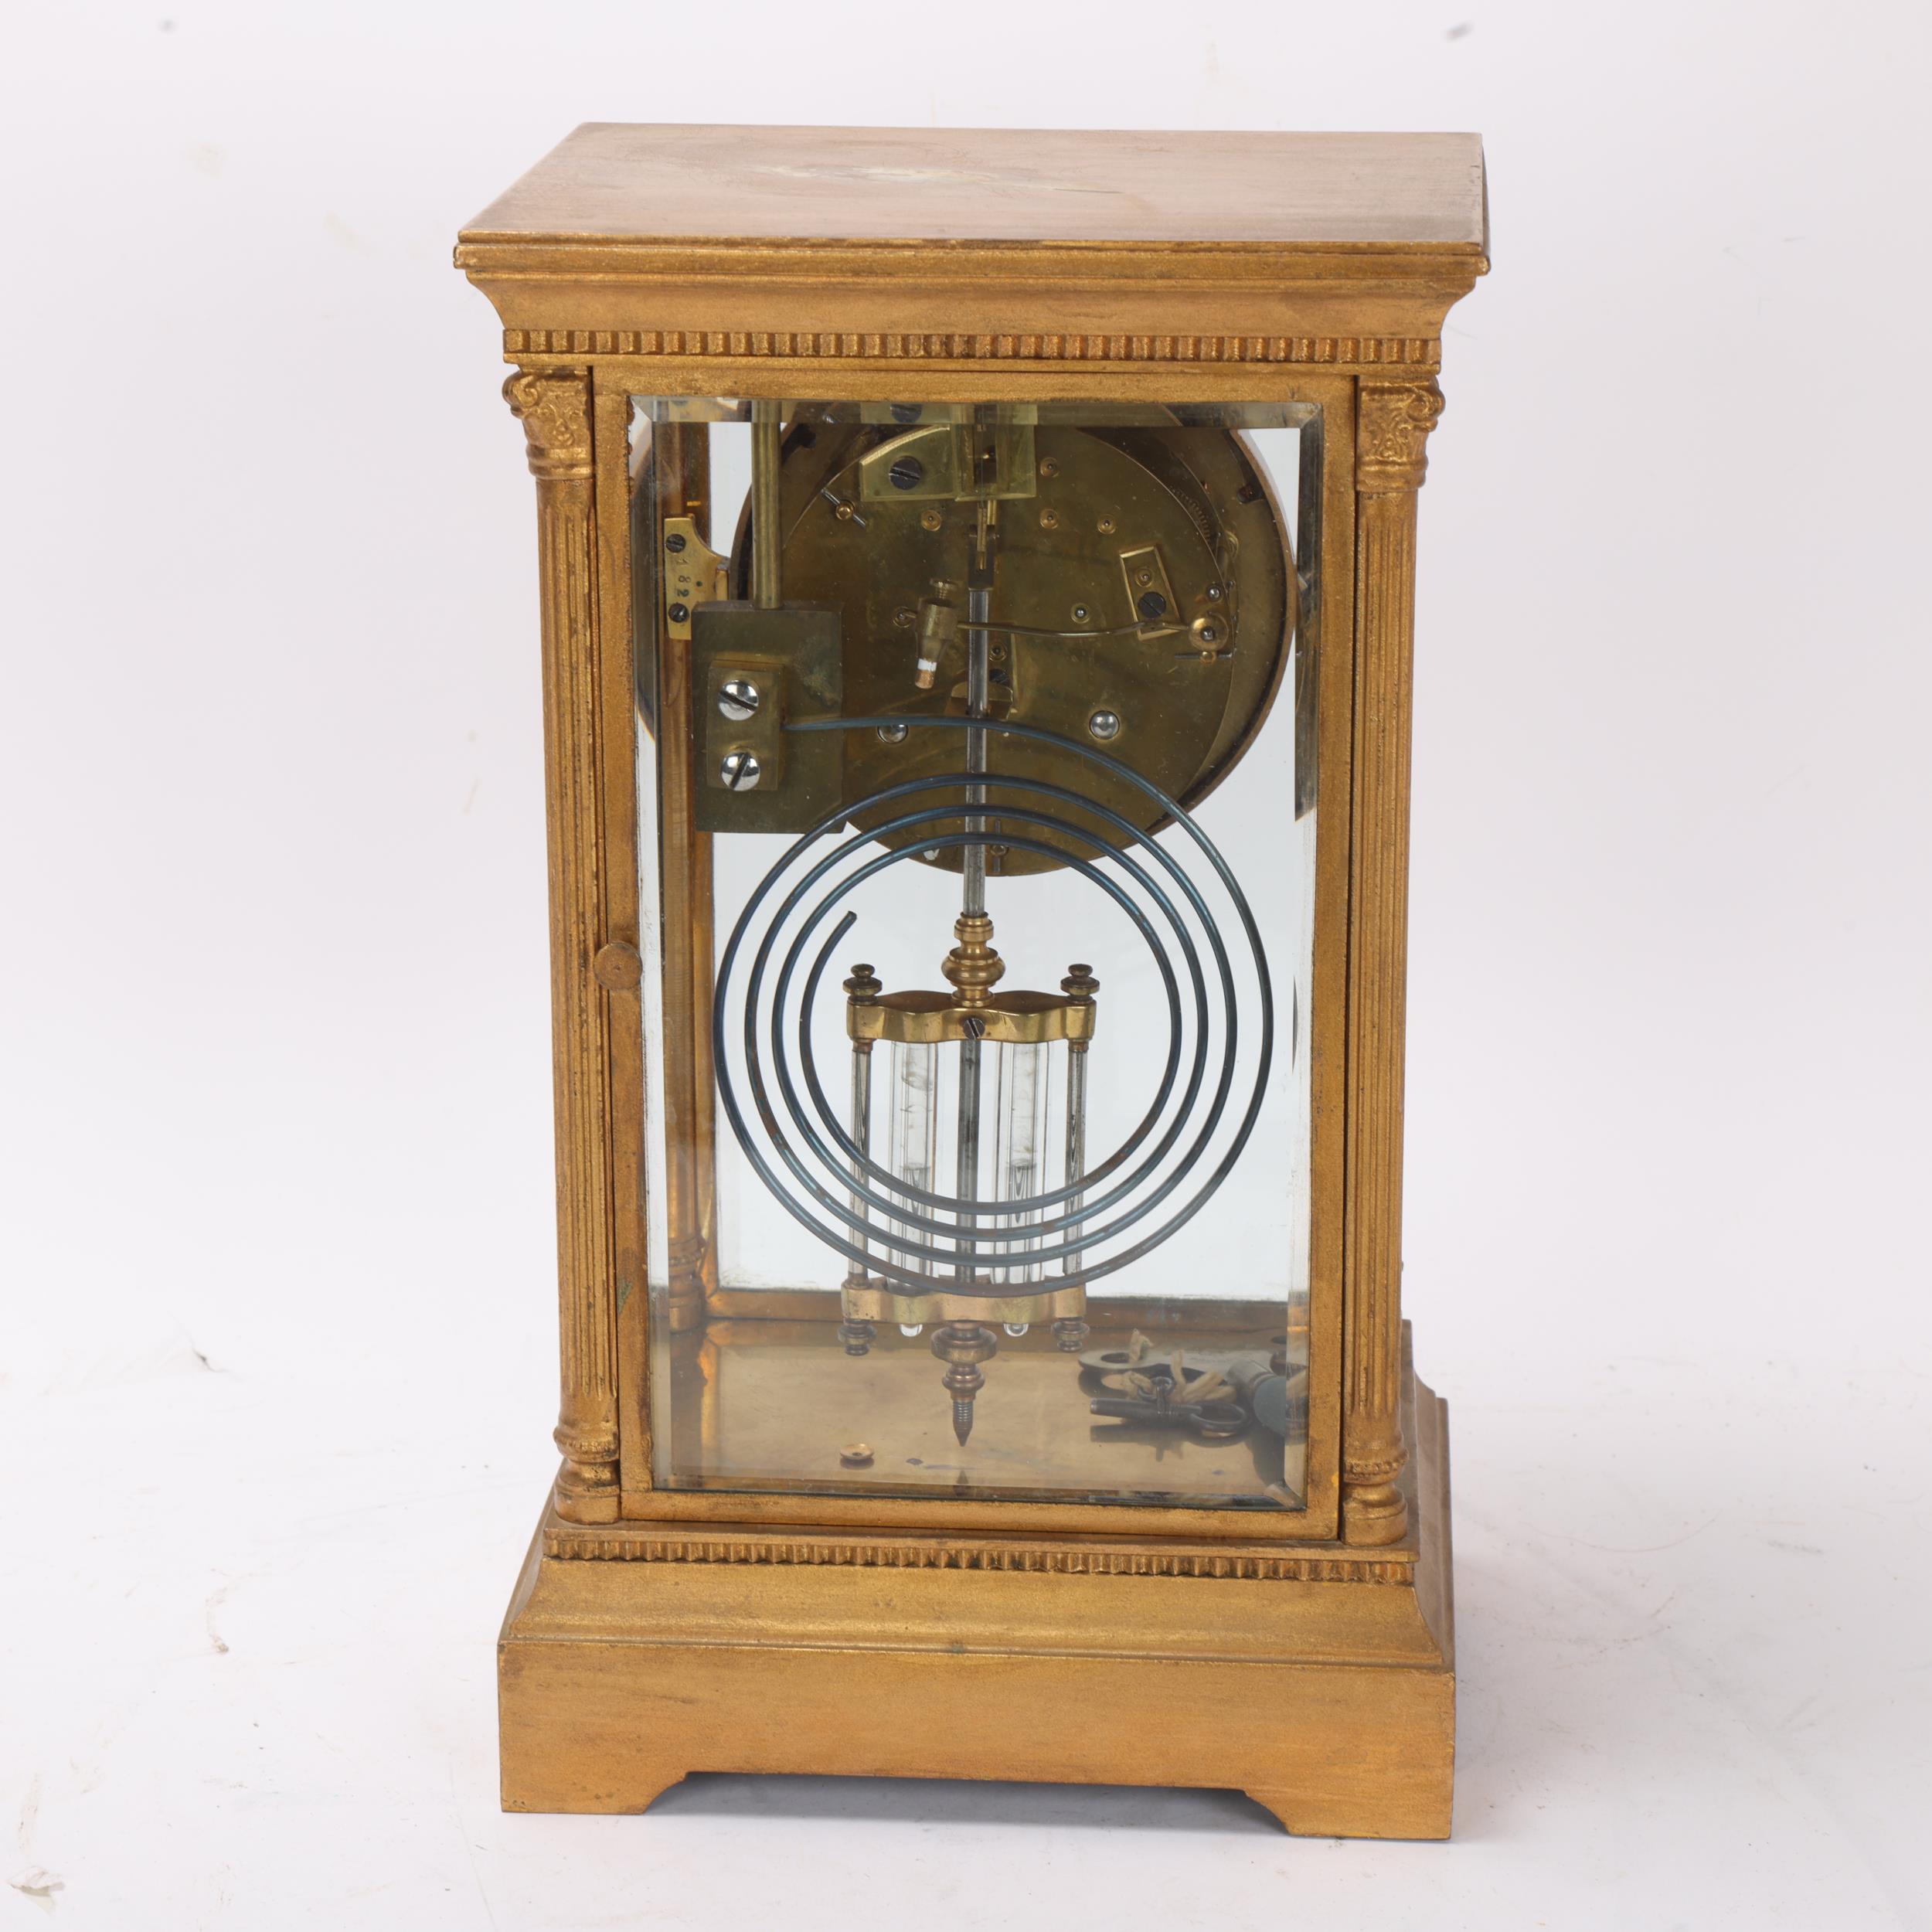 A 19th century French 4-glass regulator mantel clock, with enamel dial, mercury pendulum, and 8- - Image 3 of 3